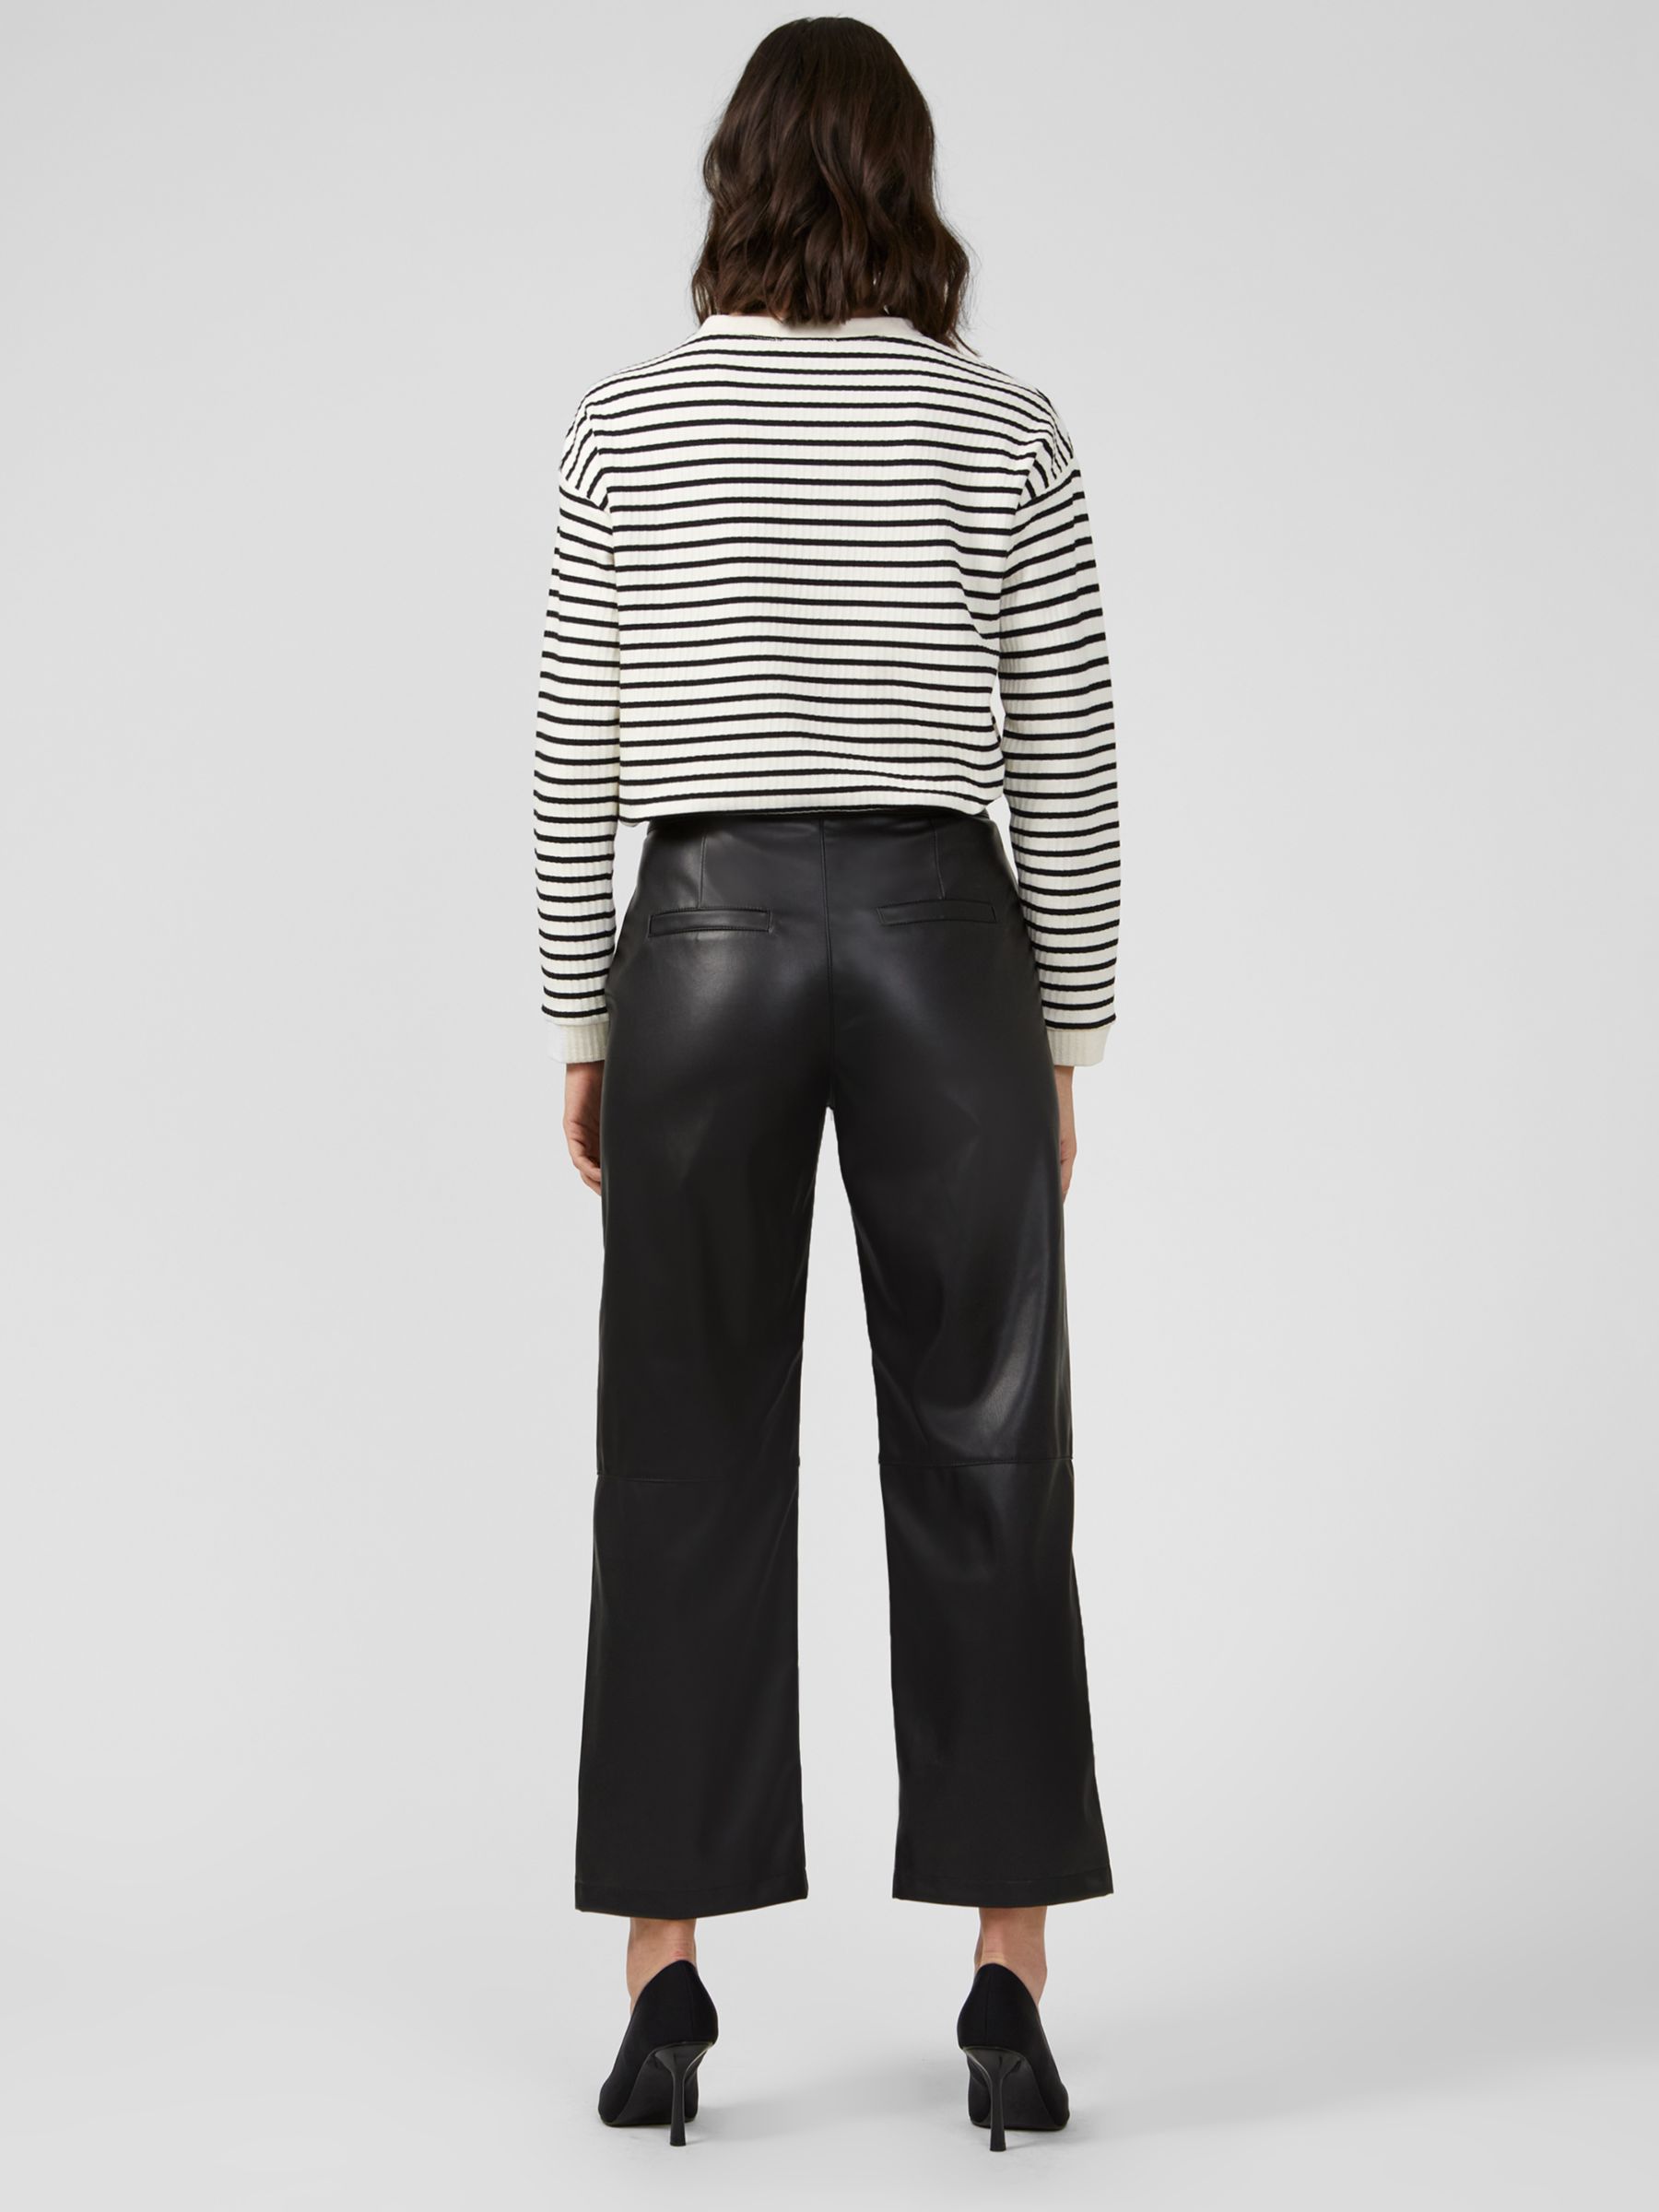 Buy Great Plains Ania Faux Leather Trouser, Black Online at johnlewis.com